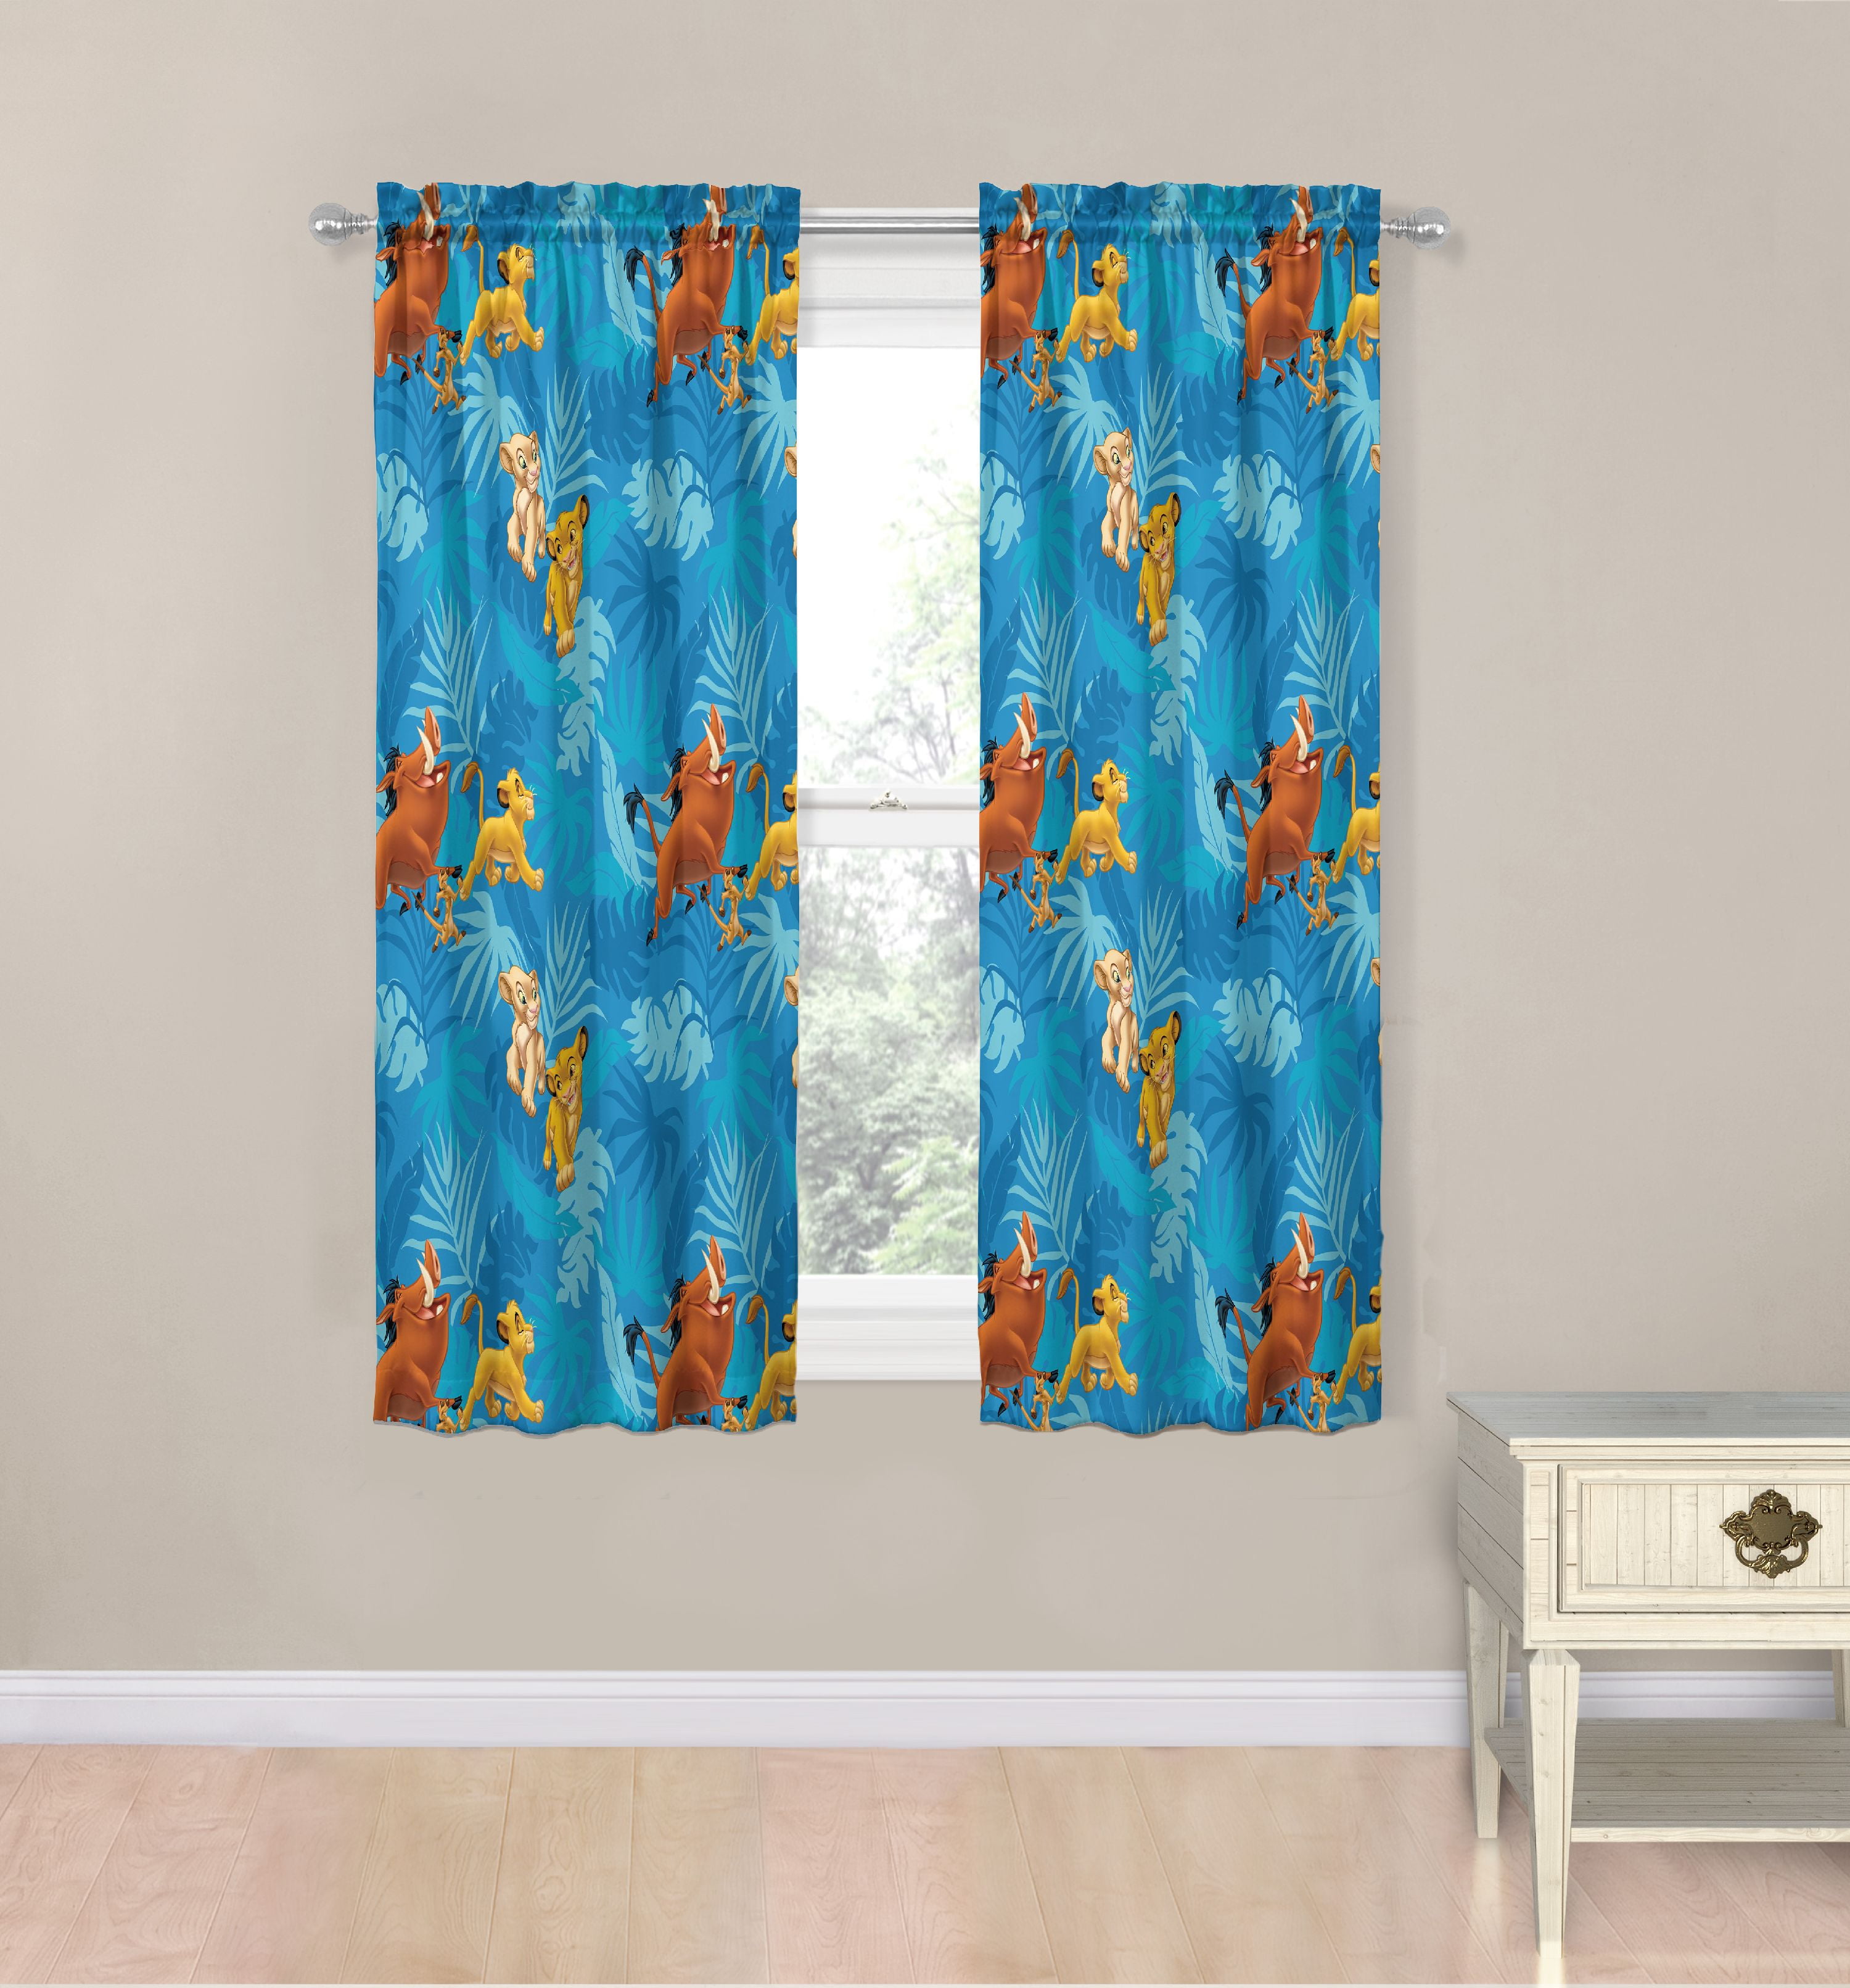 The Lion King Hanging Door Curtain Window Scarf y39 w0032 